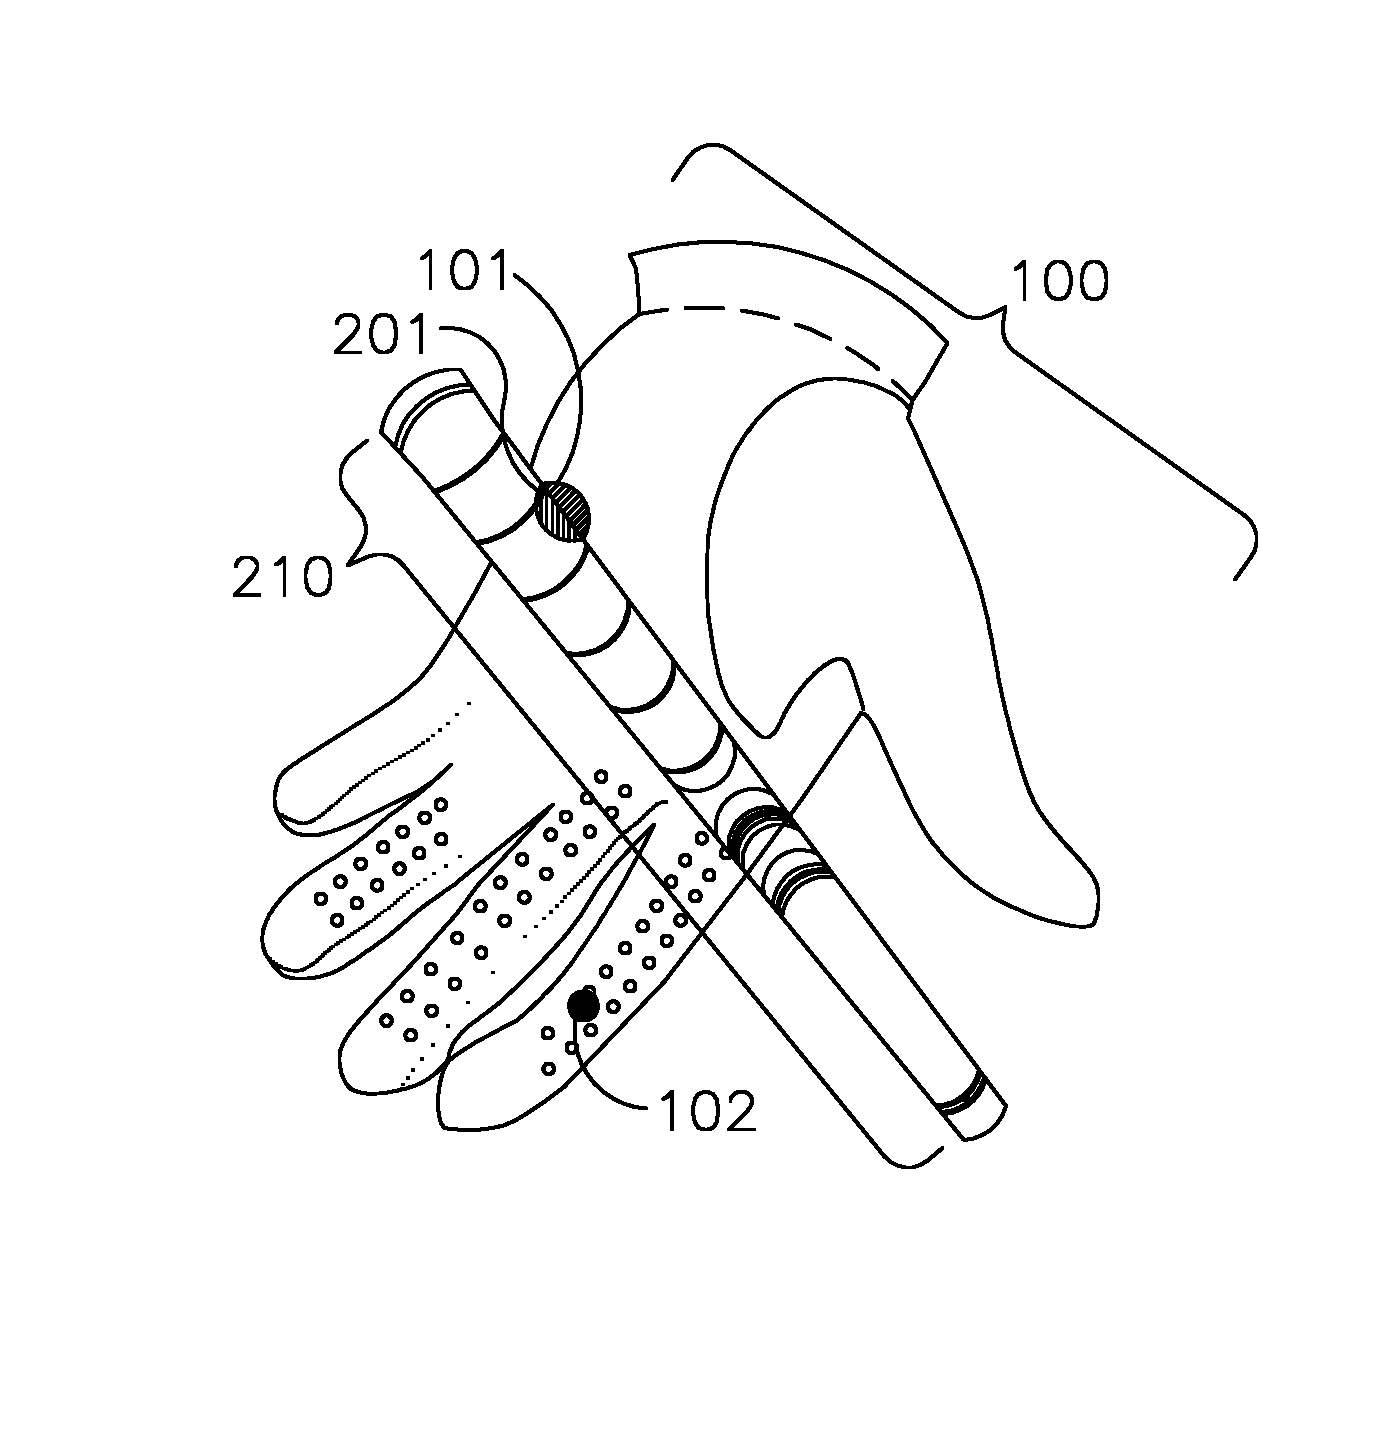 Apparatus and method for assisting a golfer to properly grip a golf club